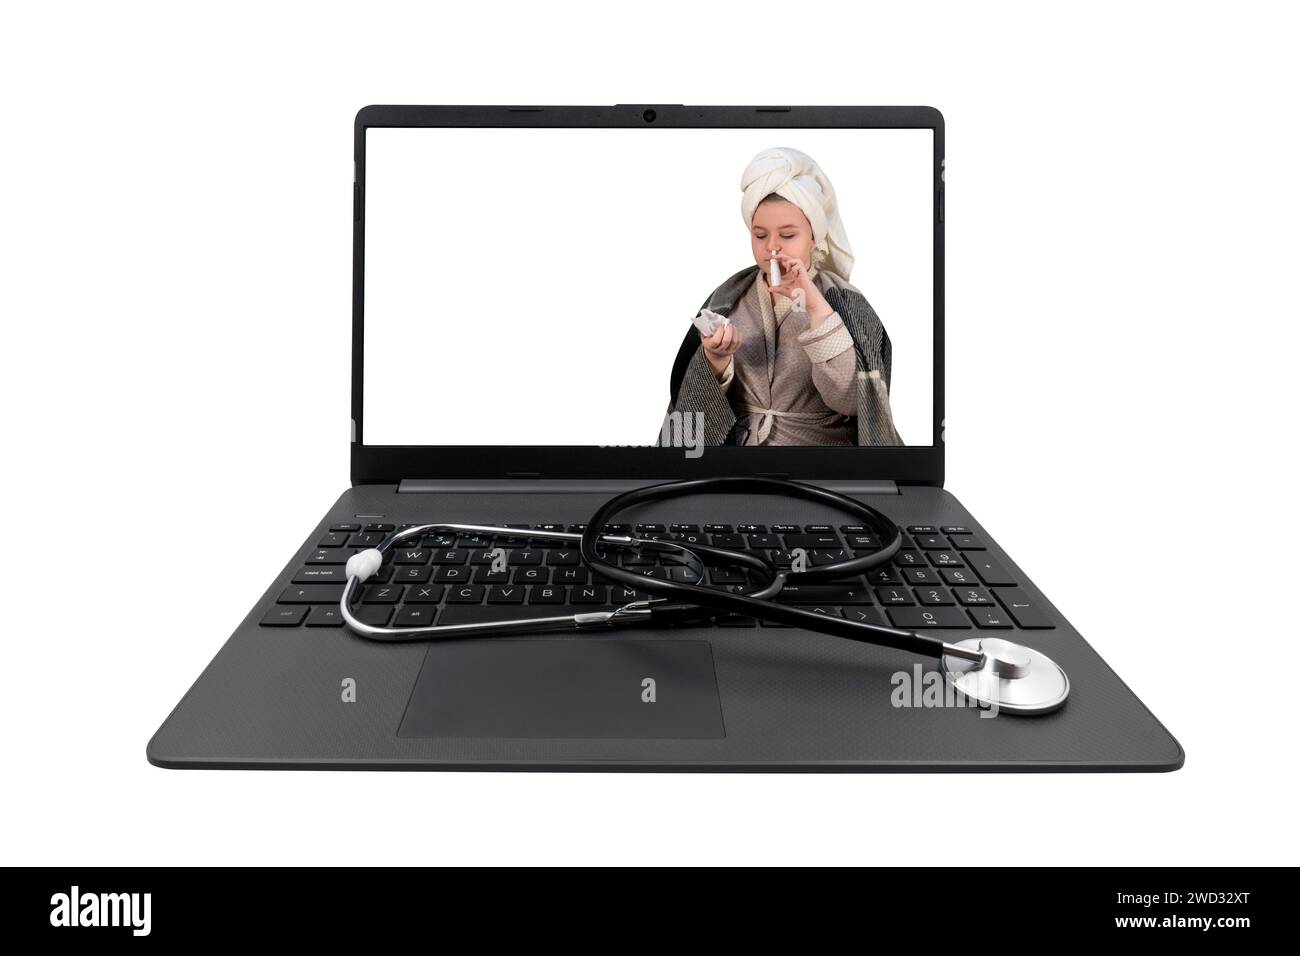 Laptop and medical stethoscope isolated on white background. On the laptop screen - a girl with cold symptoms injects spray into her nose Stock Photo